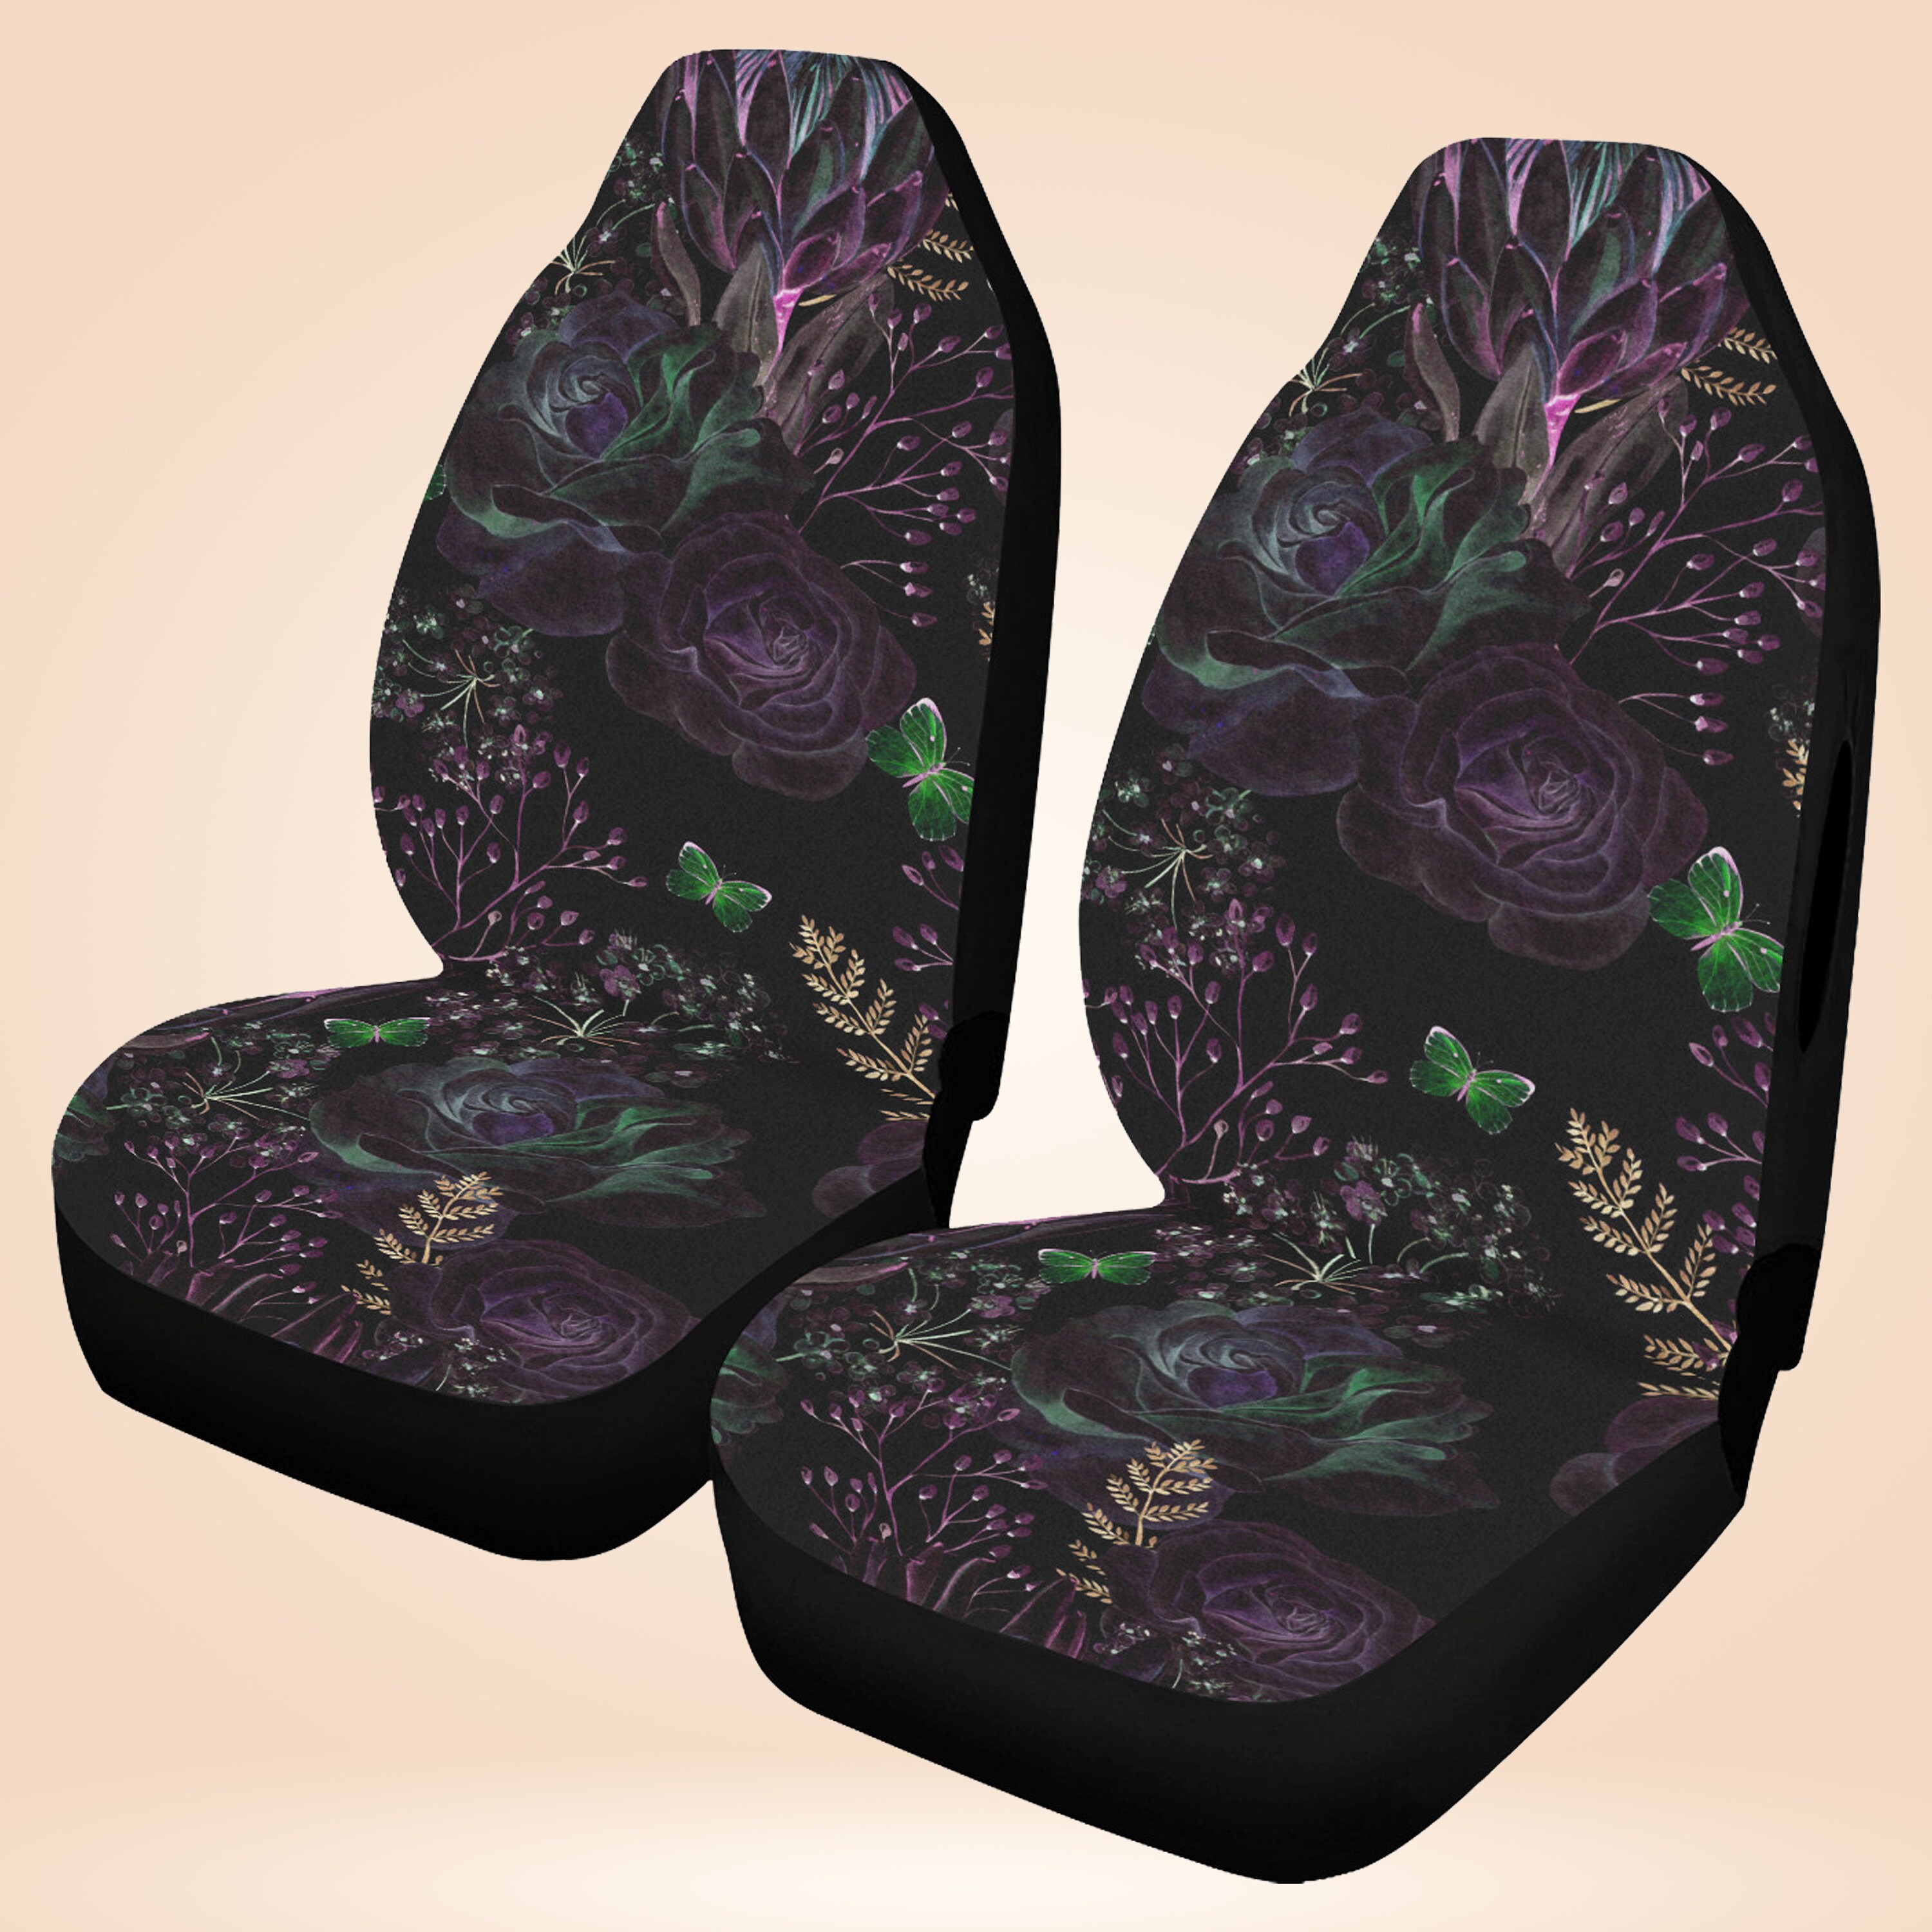 Discover Dark Roses Boho Witch Car Seat Covers, Cottagecore Cute Dark Floral Front Bucket Seat Cover For Car Vehicle, Nature seat cover